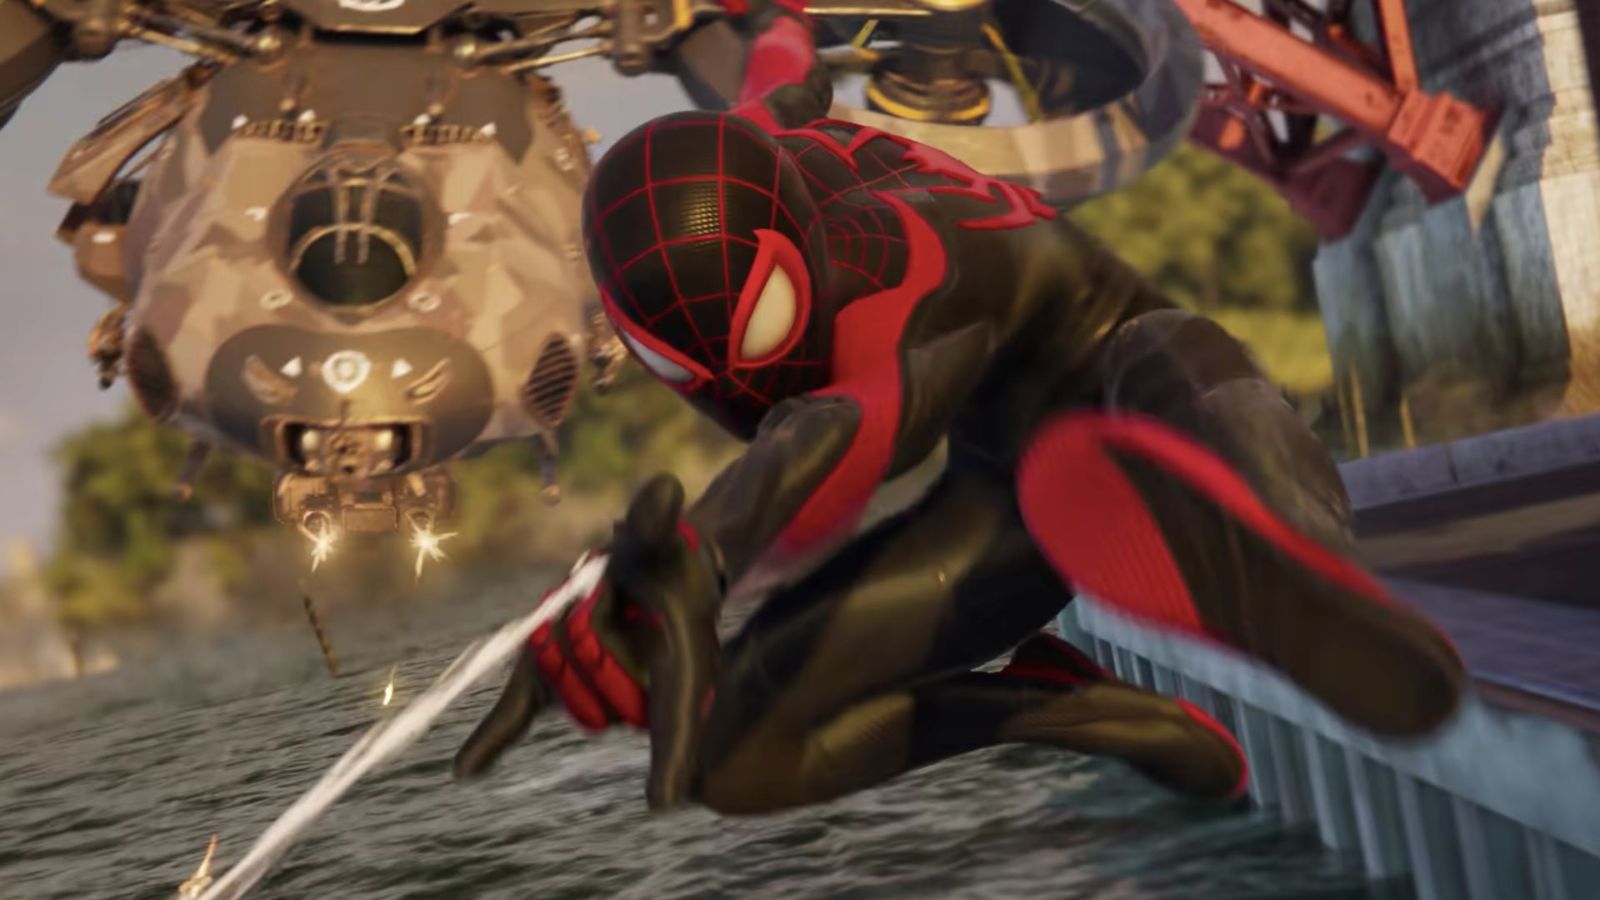 marvel spider-man 2 devs tell twitter morons the game isnt finished